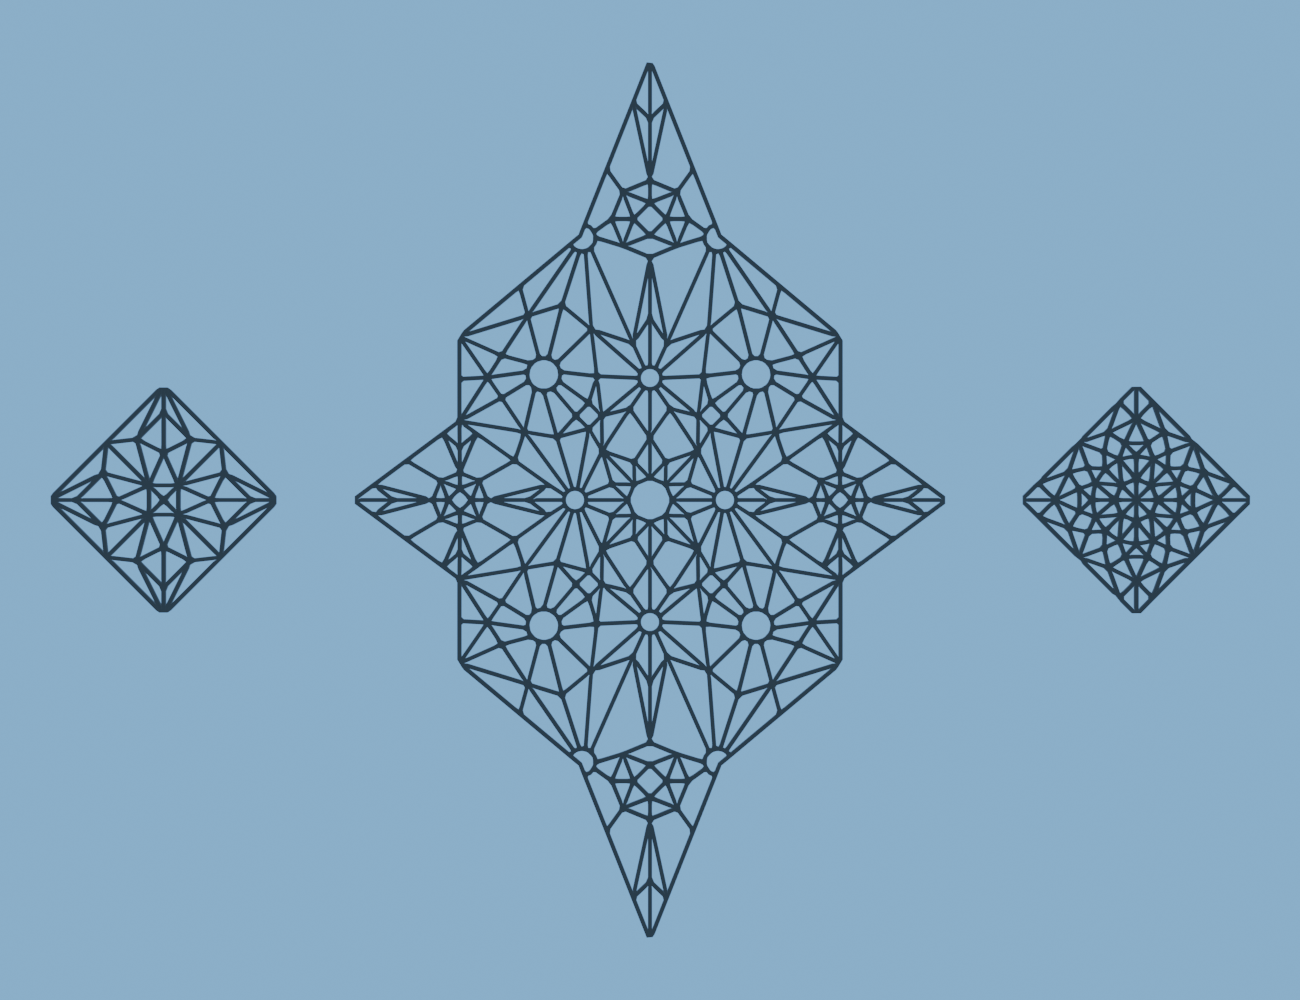 3 geometric patterns made on a computer